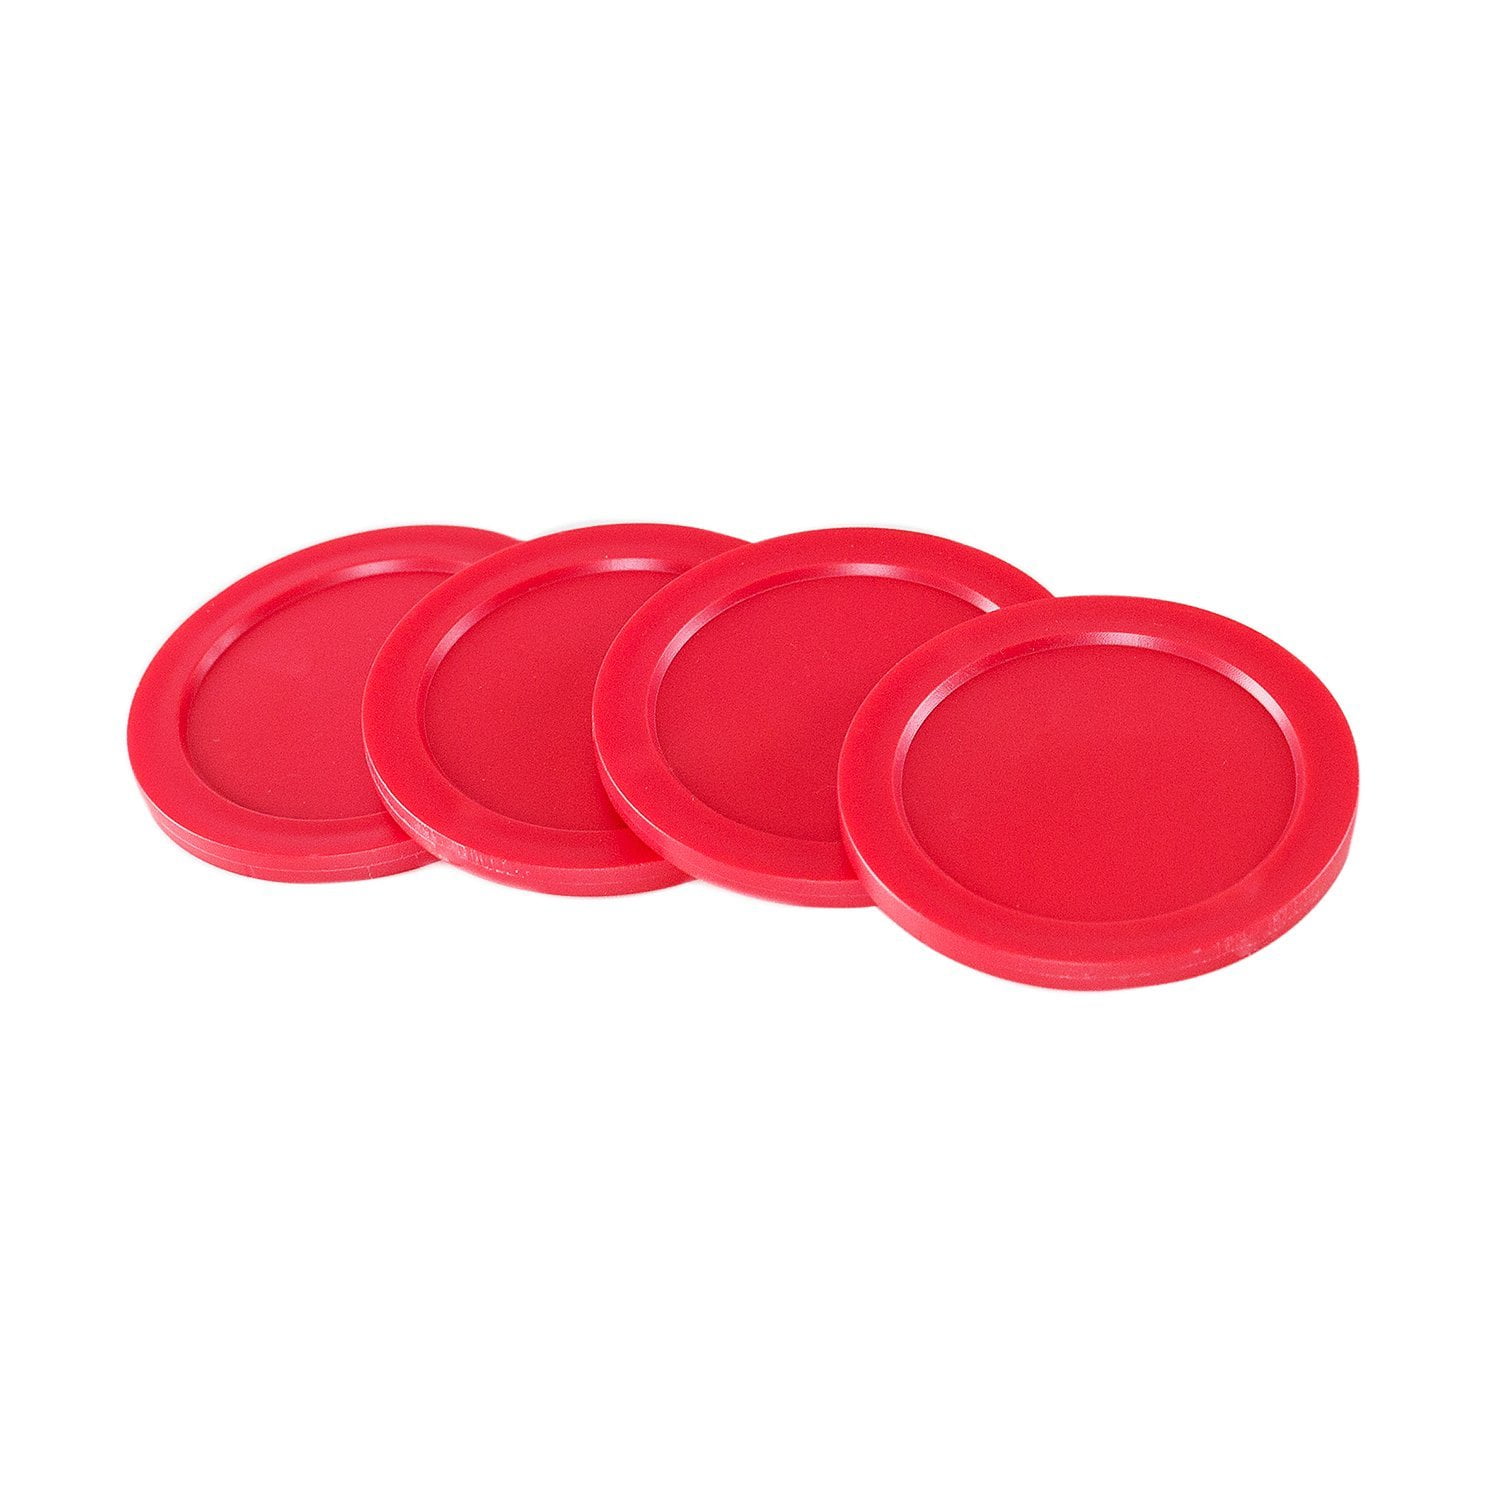 Equipment 2 Striker, 6 Puck Pack Accessories Air Hockey Red Replacement Pucks & Slider Pusher Goalies for Game Tables 